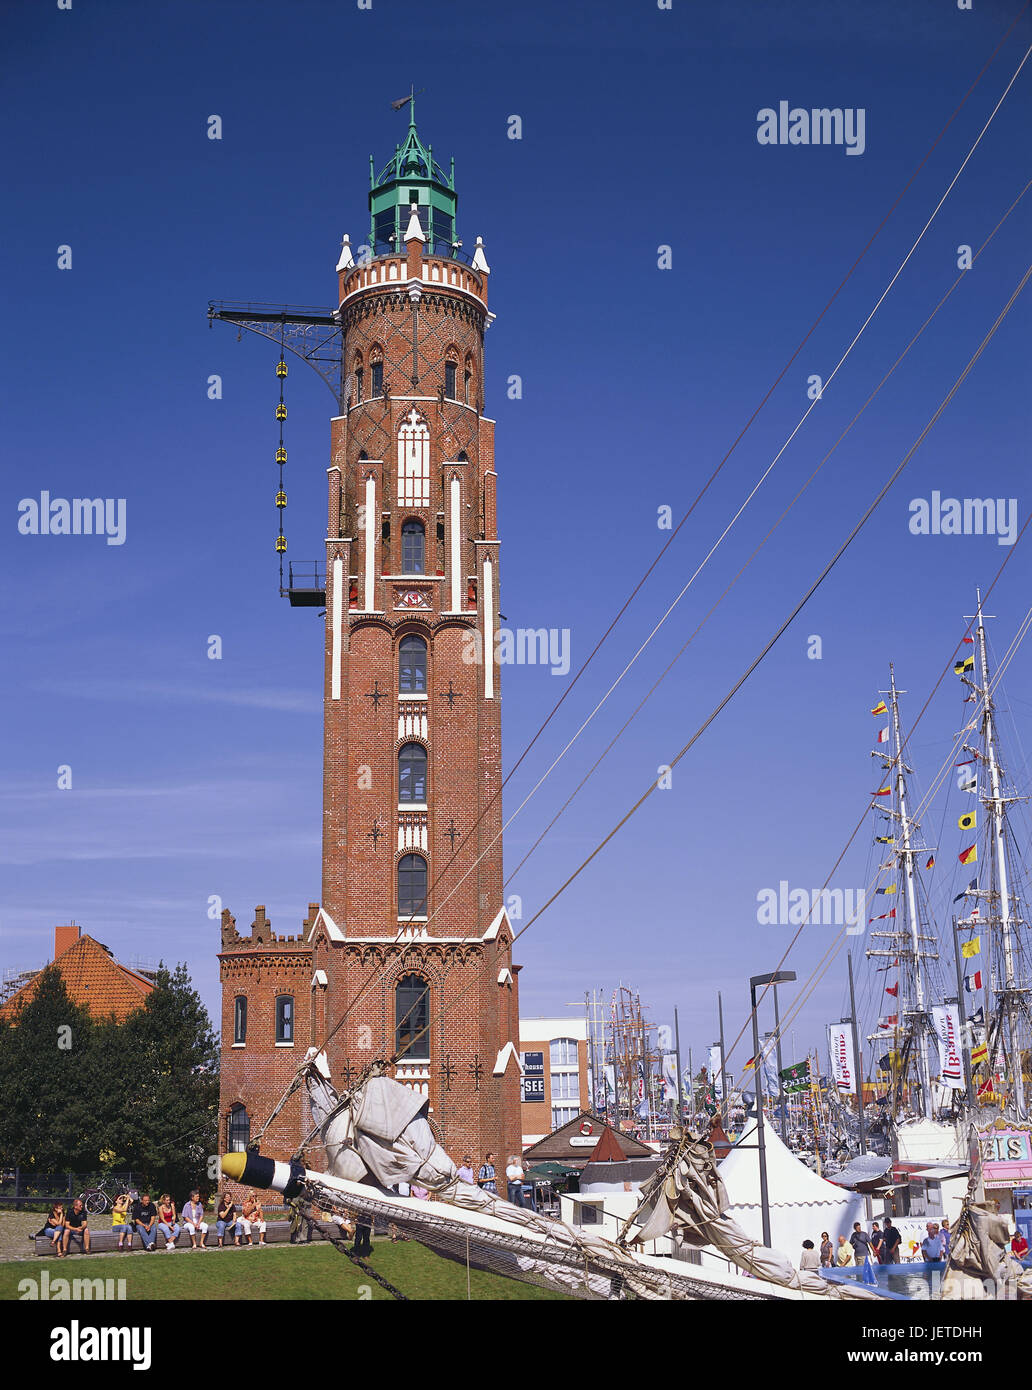 Germany, Bremerhaven, new harbour, big lighthouse, outside, tourists, North Germany, town, harbour, Simon Loschen tower, Loschenturm, lighthouse, sea character, landmark, sea character, architecture, brick, brick Gothic, navigation, ship, place of interest, tourism, person, sky, blue, sunshine, Stock Photo